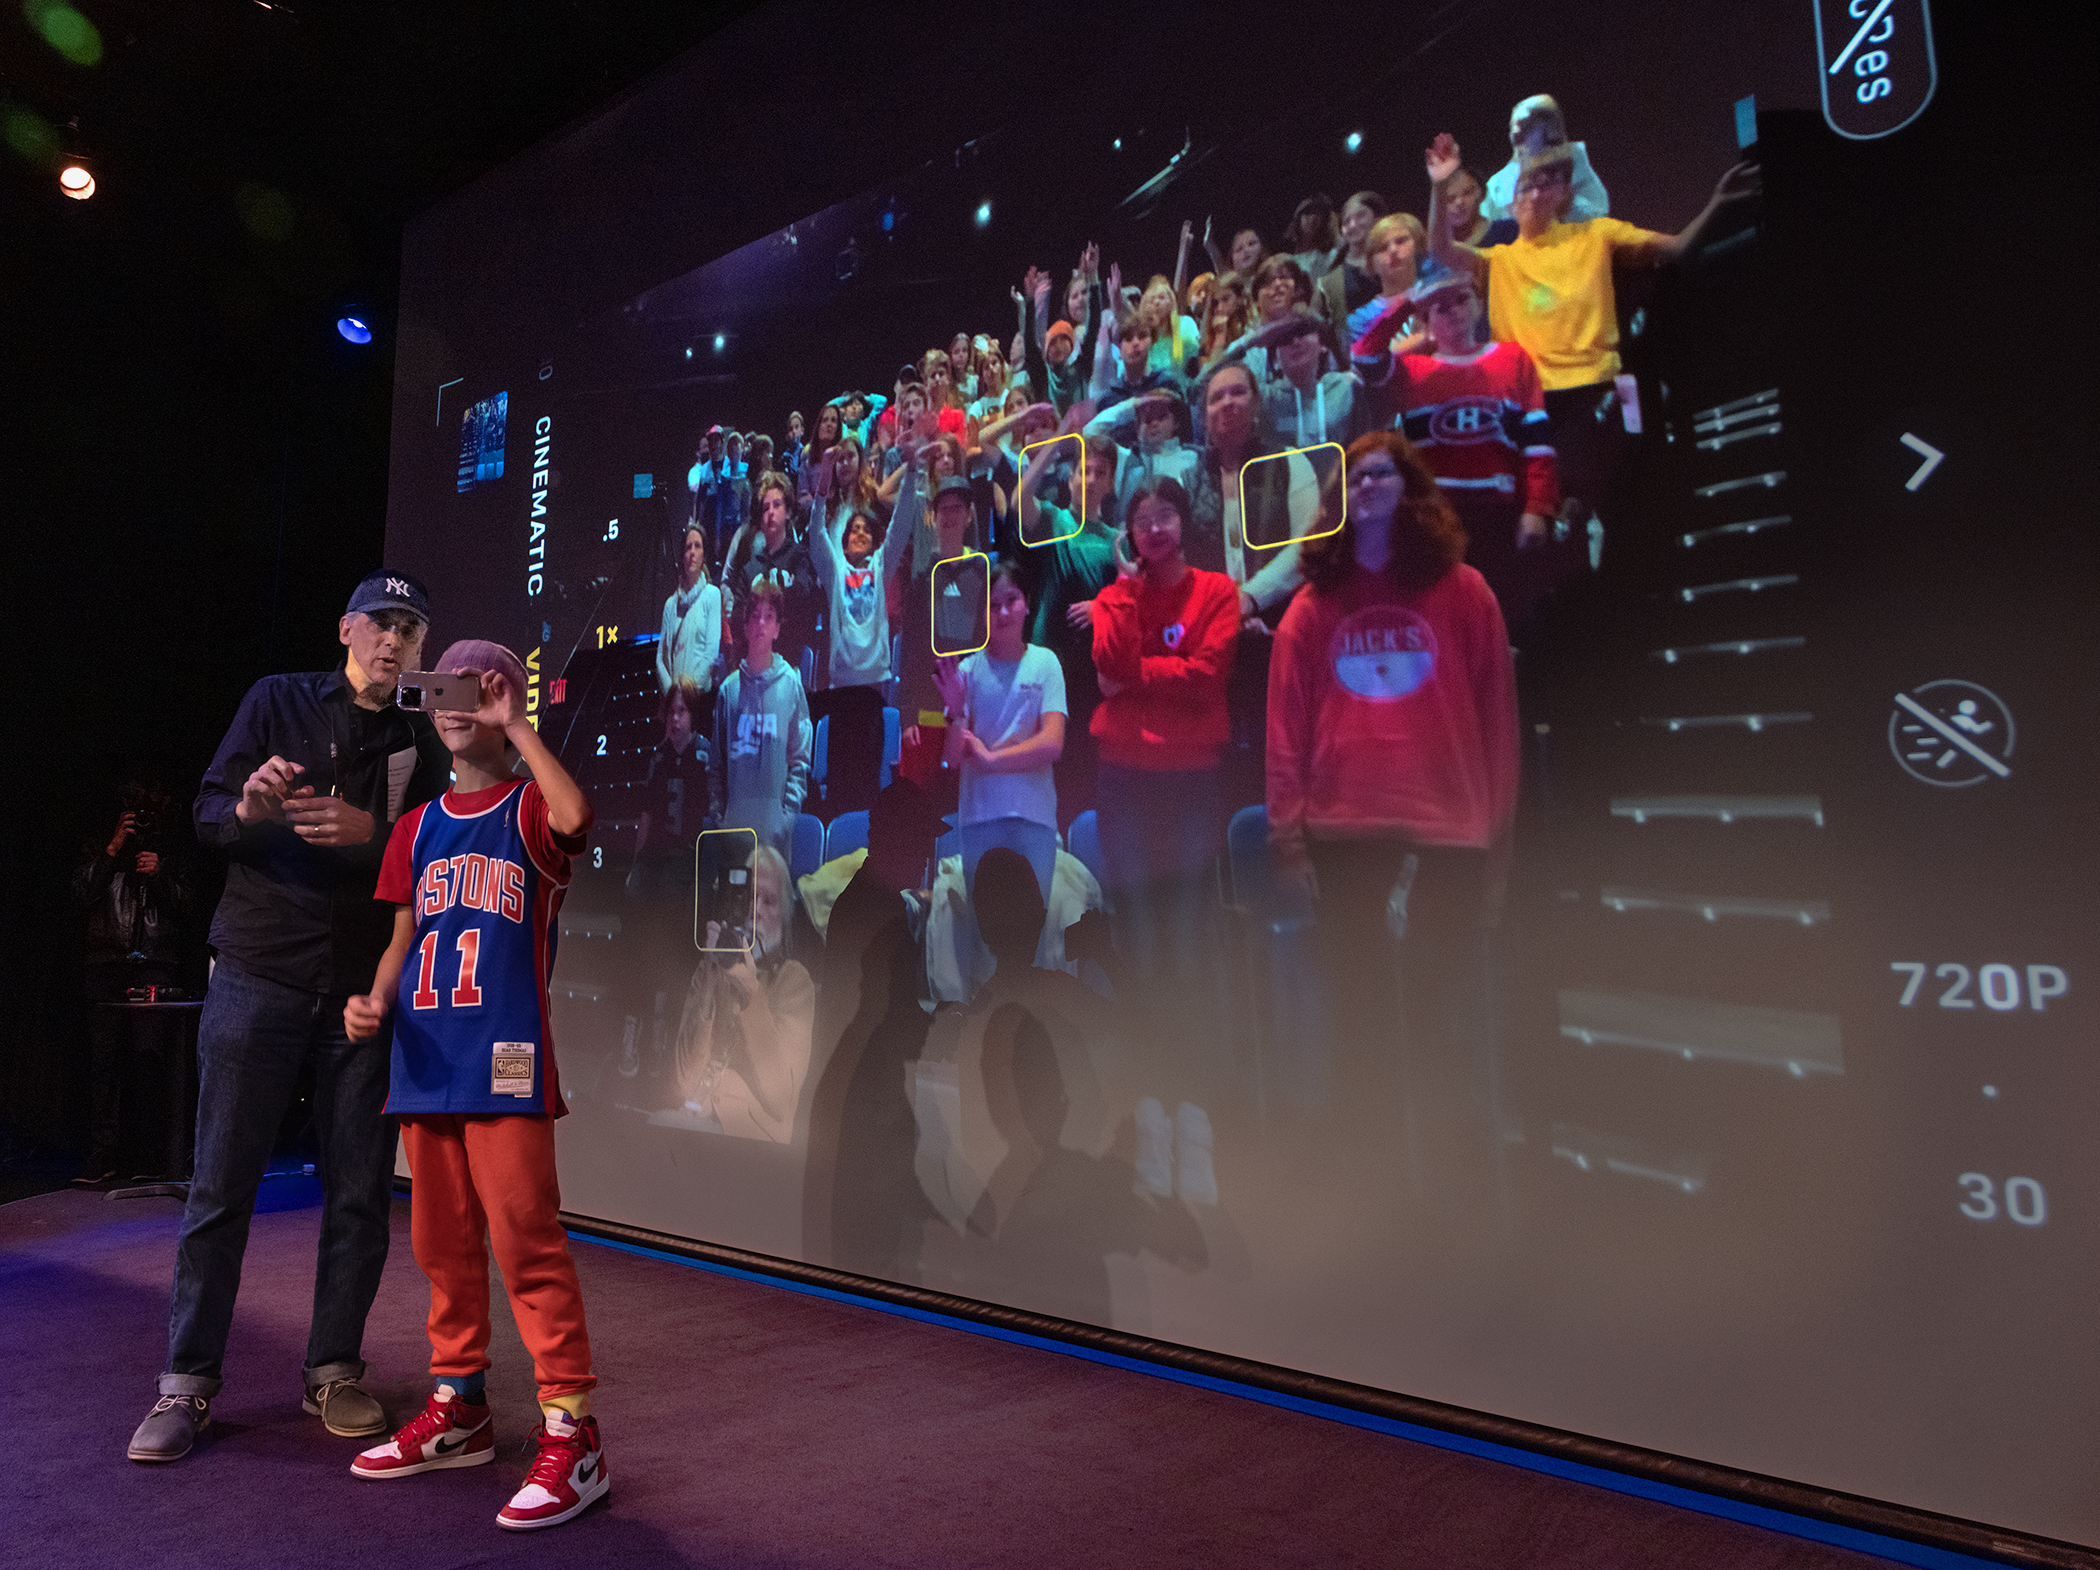 Filmmaker Roger Sherman of Florentine Films led a hands-on film-making workshop for nearly 350 students from area schools who attended the Hamptons Doc Fest’s Young Voices Program on December 6 at Bay Street Theater. CB GRUBB/COURTESY HAMPTONS DOC FEST